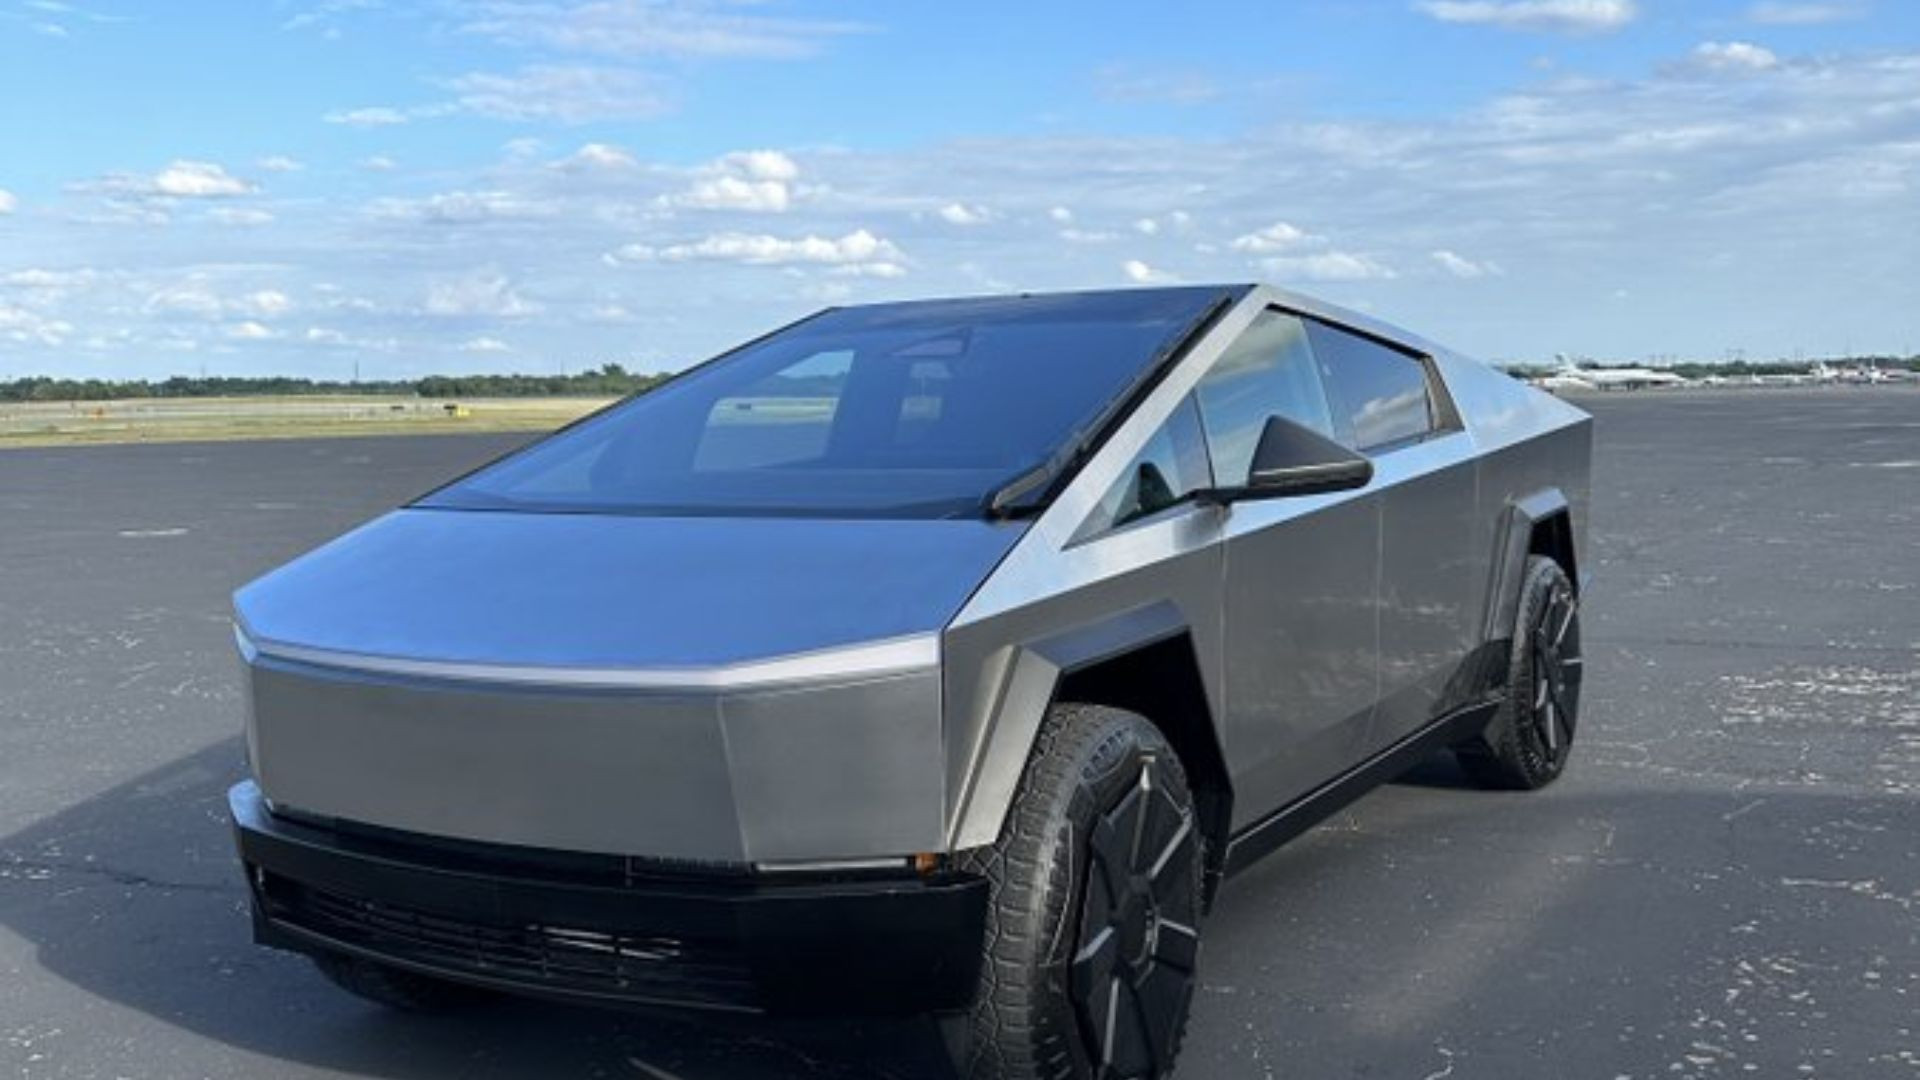 Tesla's Big Leap in Texas How They're Rolling Out 1,000 Futuristic Cybertrucks Every Week---